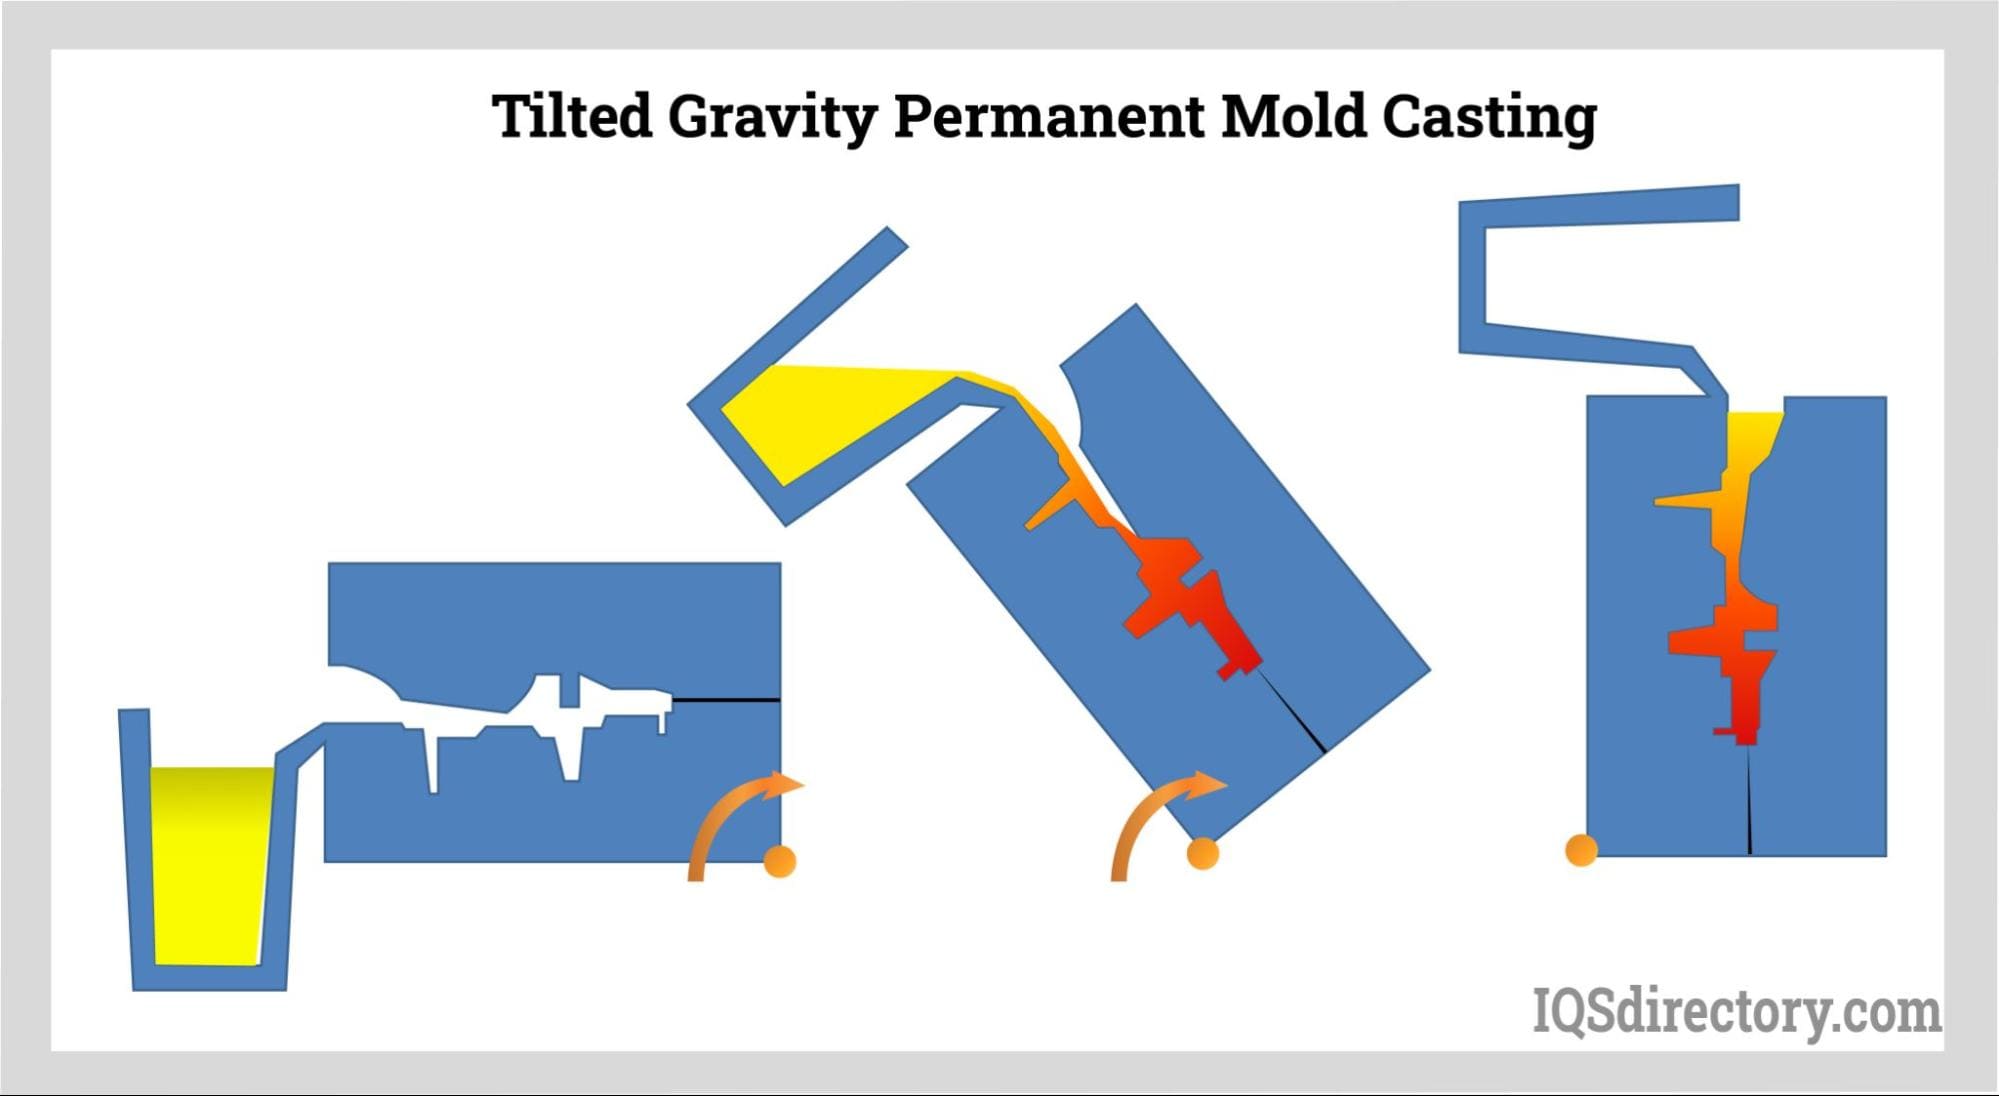 Tilted Gravity Permanent Mold Casting